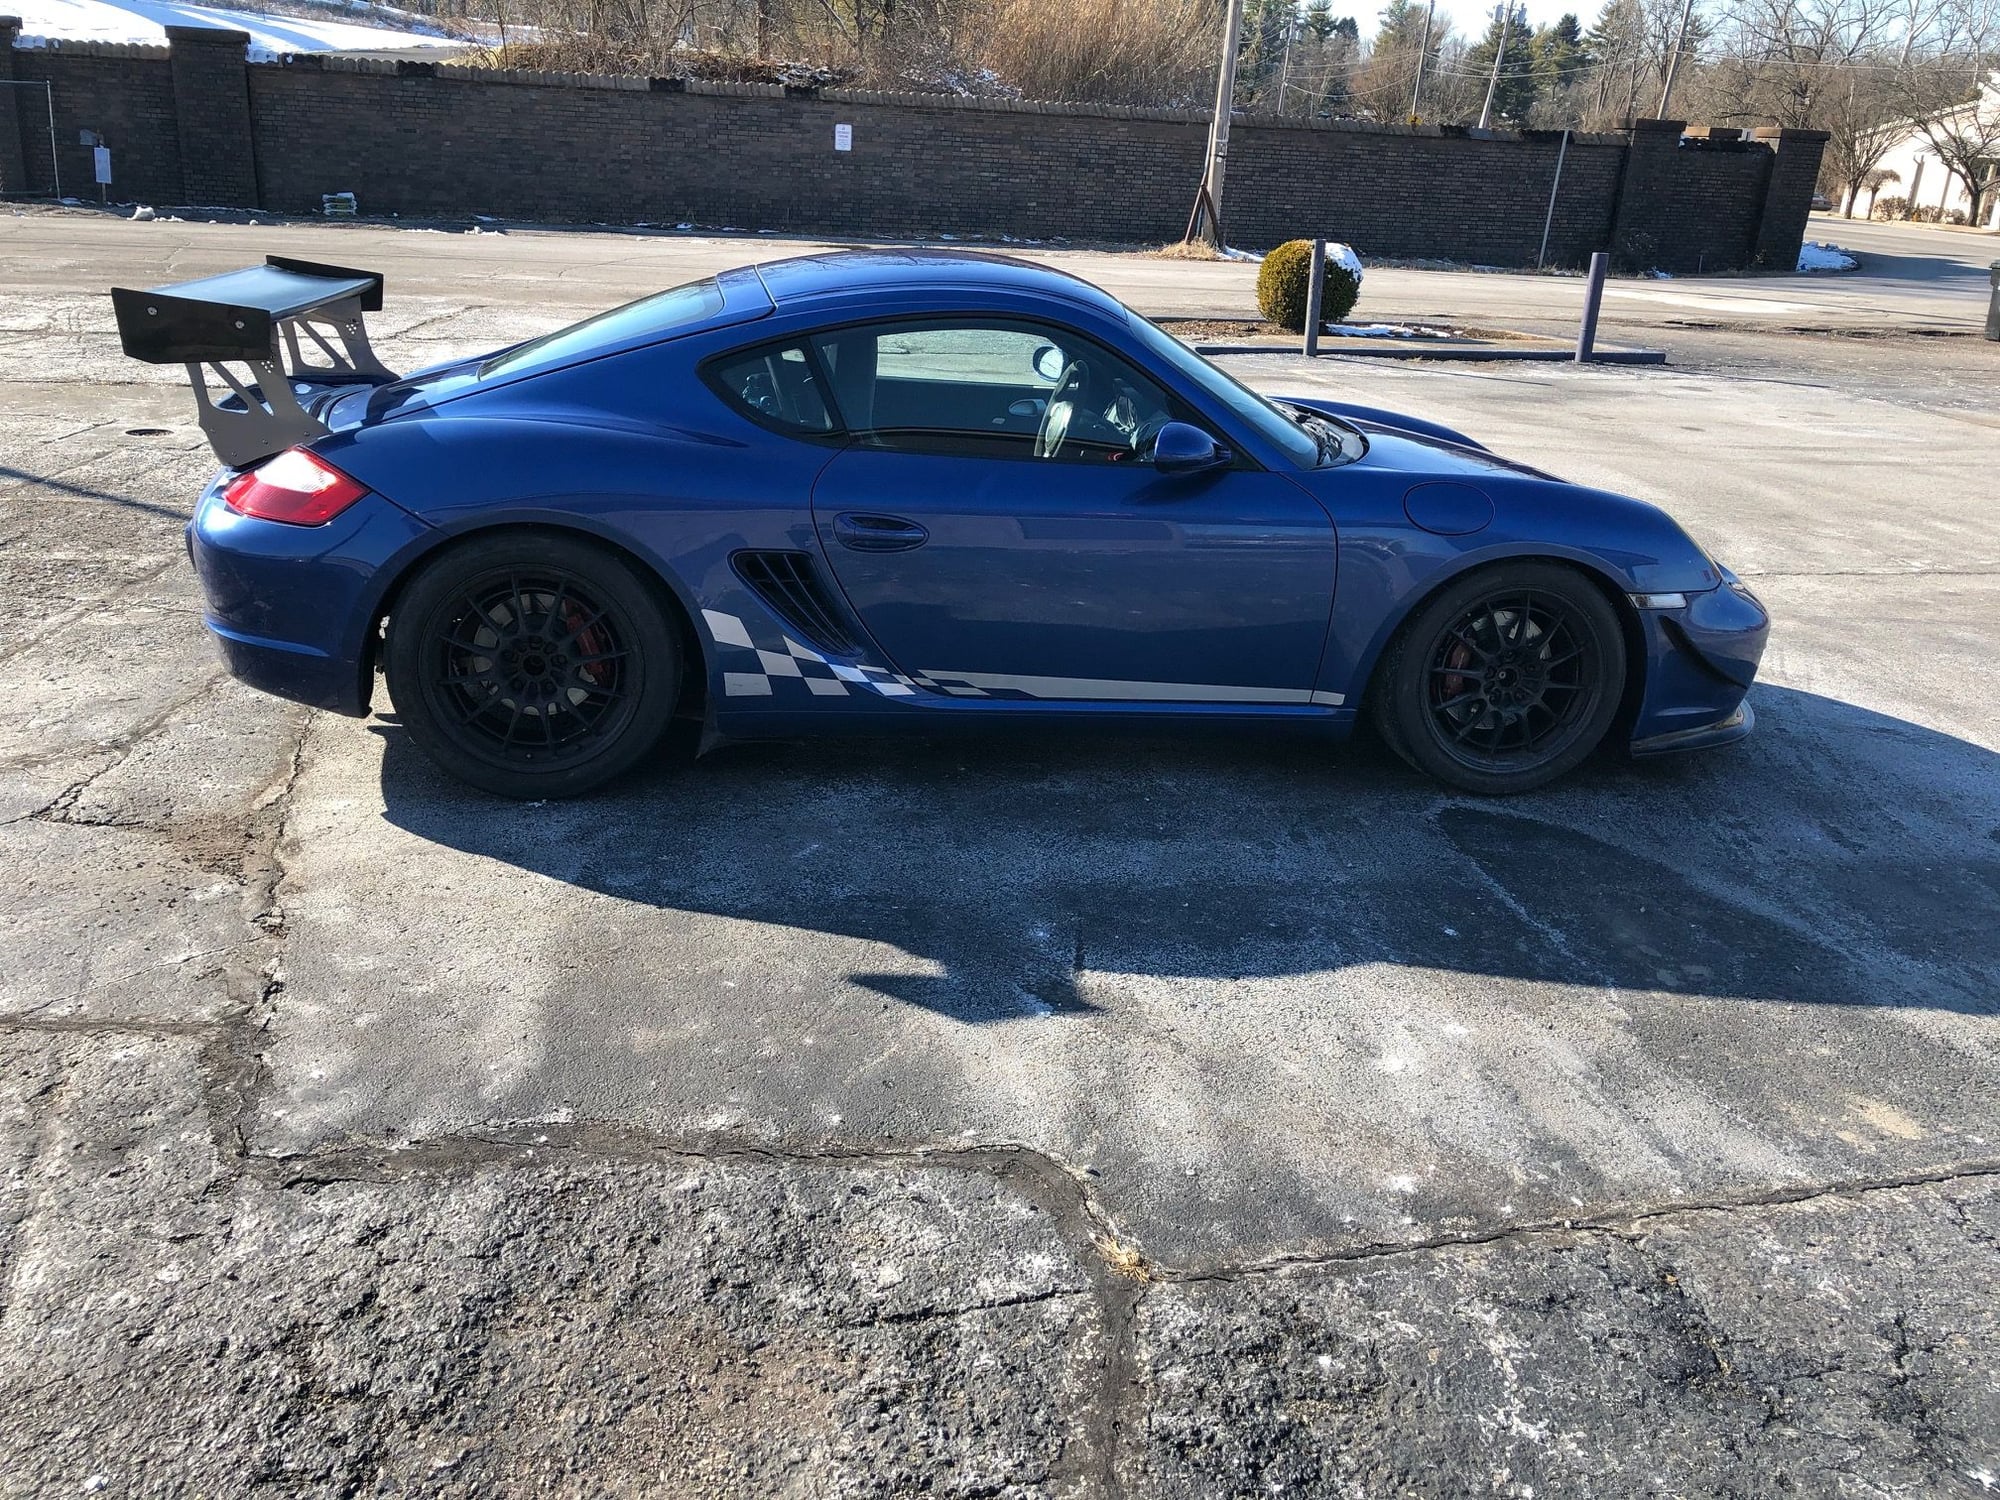 2007 Porsche Cayman - For Sale 2007 987.1 - Cayman-S - 6spd, DE/Track Car - low miles - Used - VIN WP0AB29807U783195 - 28,000 Miles - 6 cyl - 2WD - Manual - Coupe - Blue - Louisville, KY 40204, United States